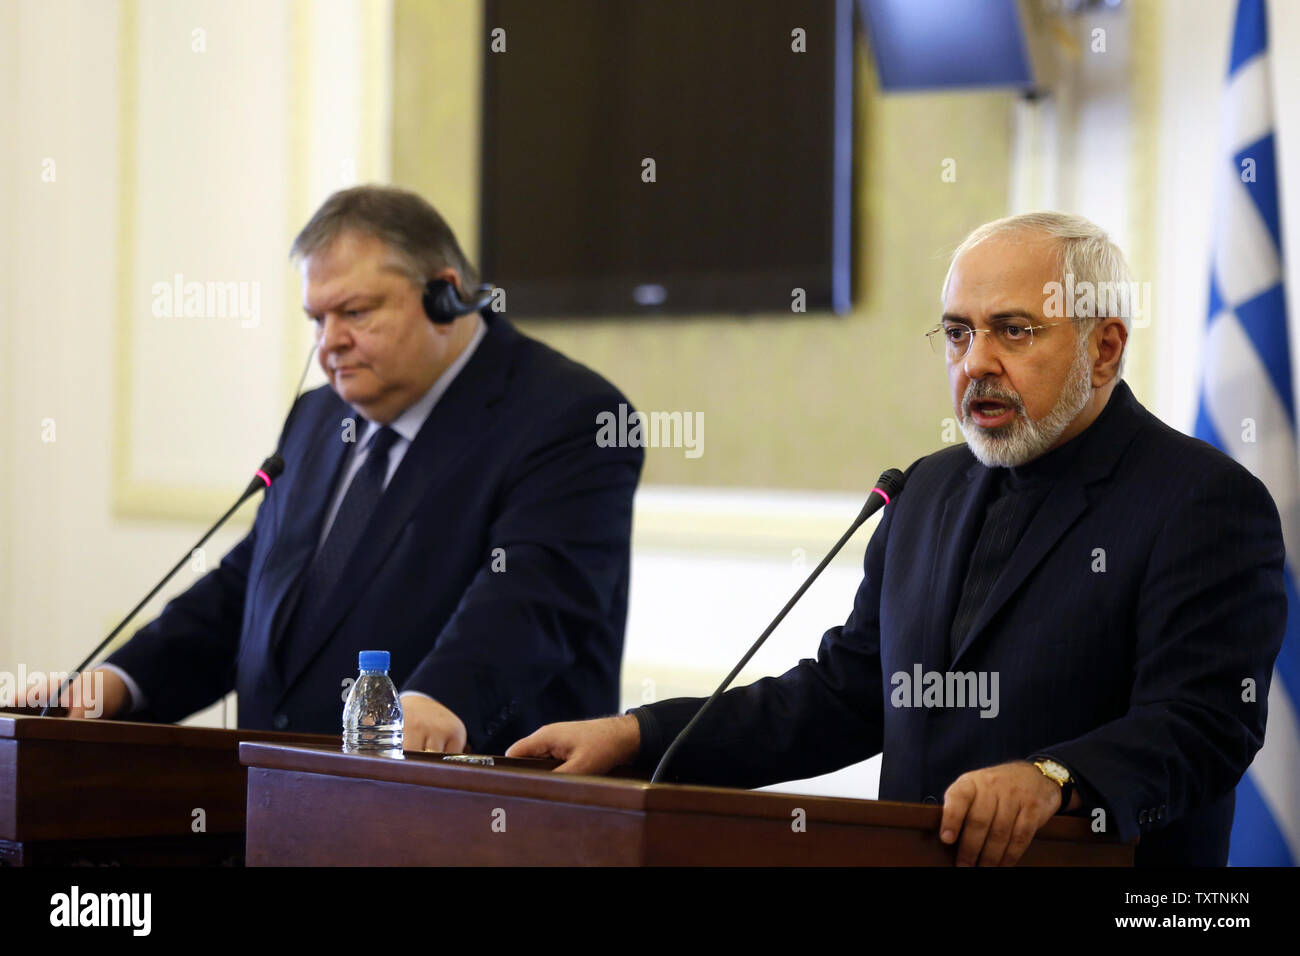 Iranian FM Mohammad Javad Zarif (R) speaks as Evangelos Venizelos, Greek foreign minister (L) listens during their joint press conference at Iranian Foreign ministry in Tehran, Iran on March 15, 2014. Venizelos is also scheduled to hold talks with other Iranian officials to discuss ways of expansion of bilateral ties between Athens and Tehran.     UPI/Maryam Rahmanian Stock Photo